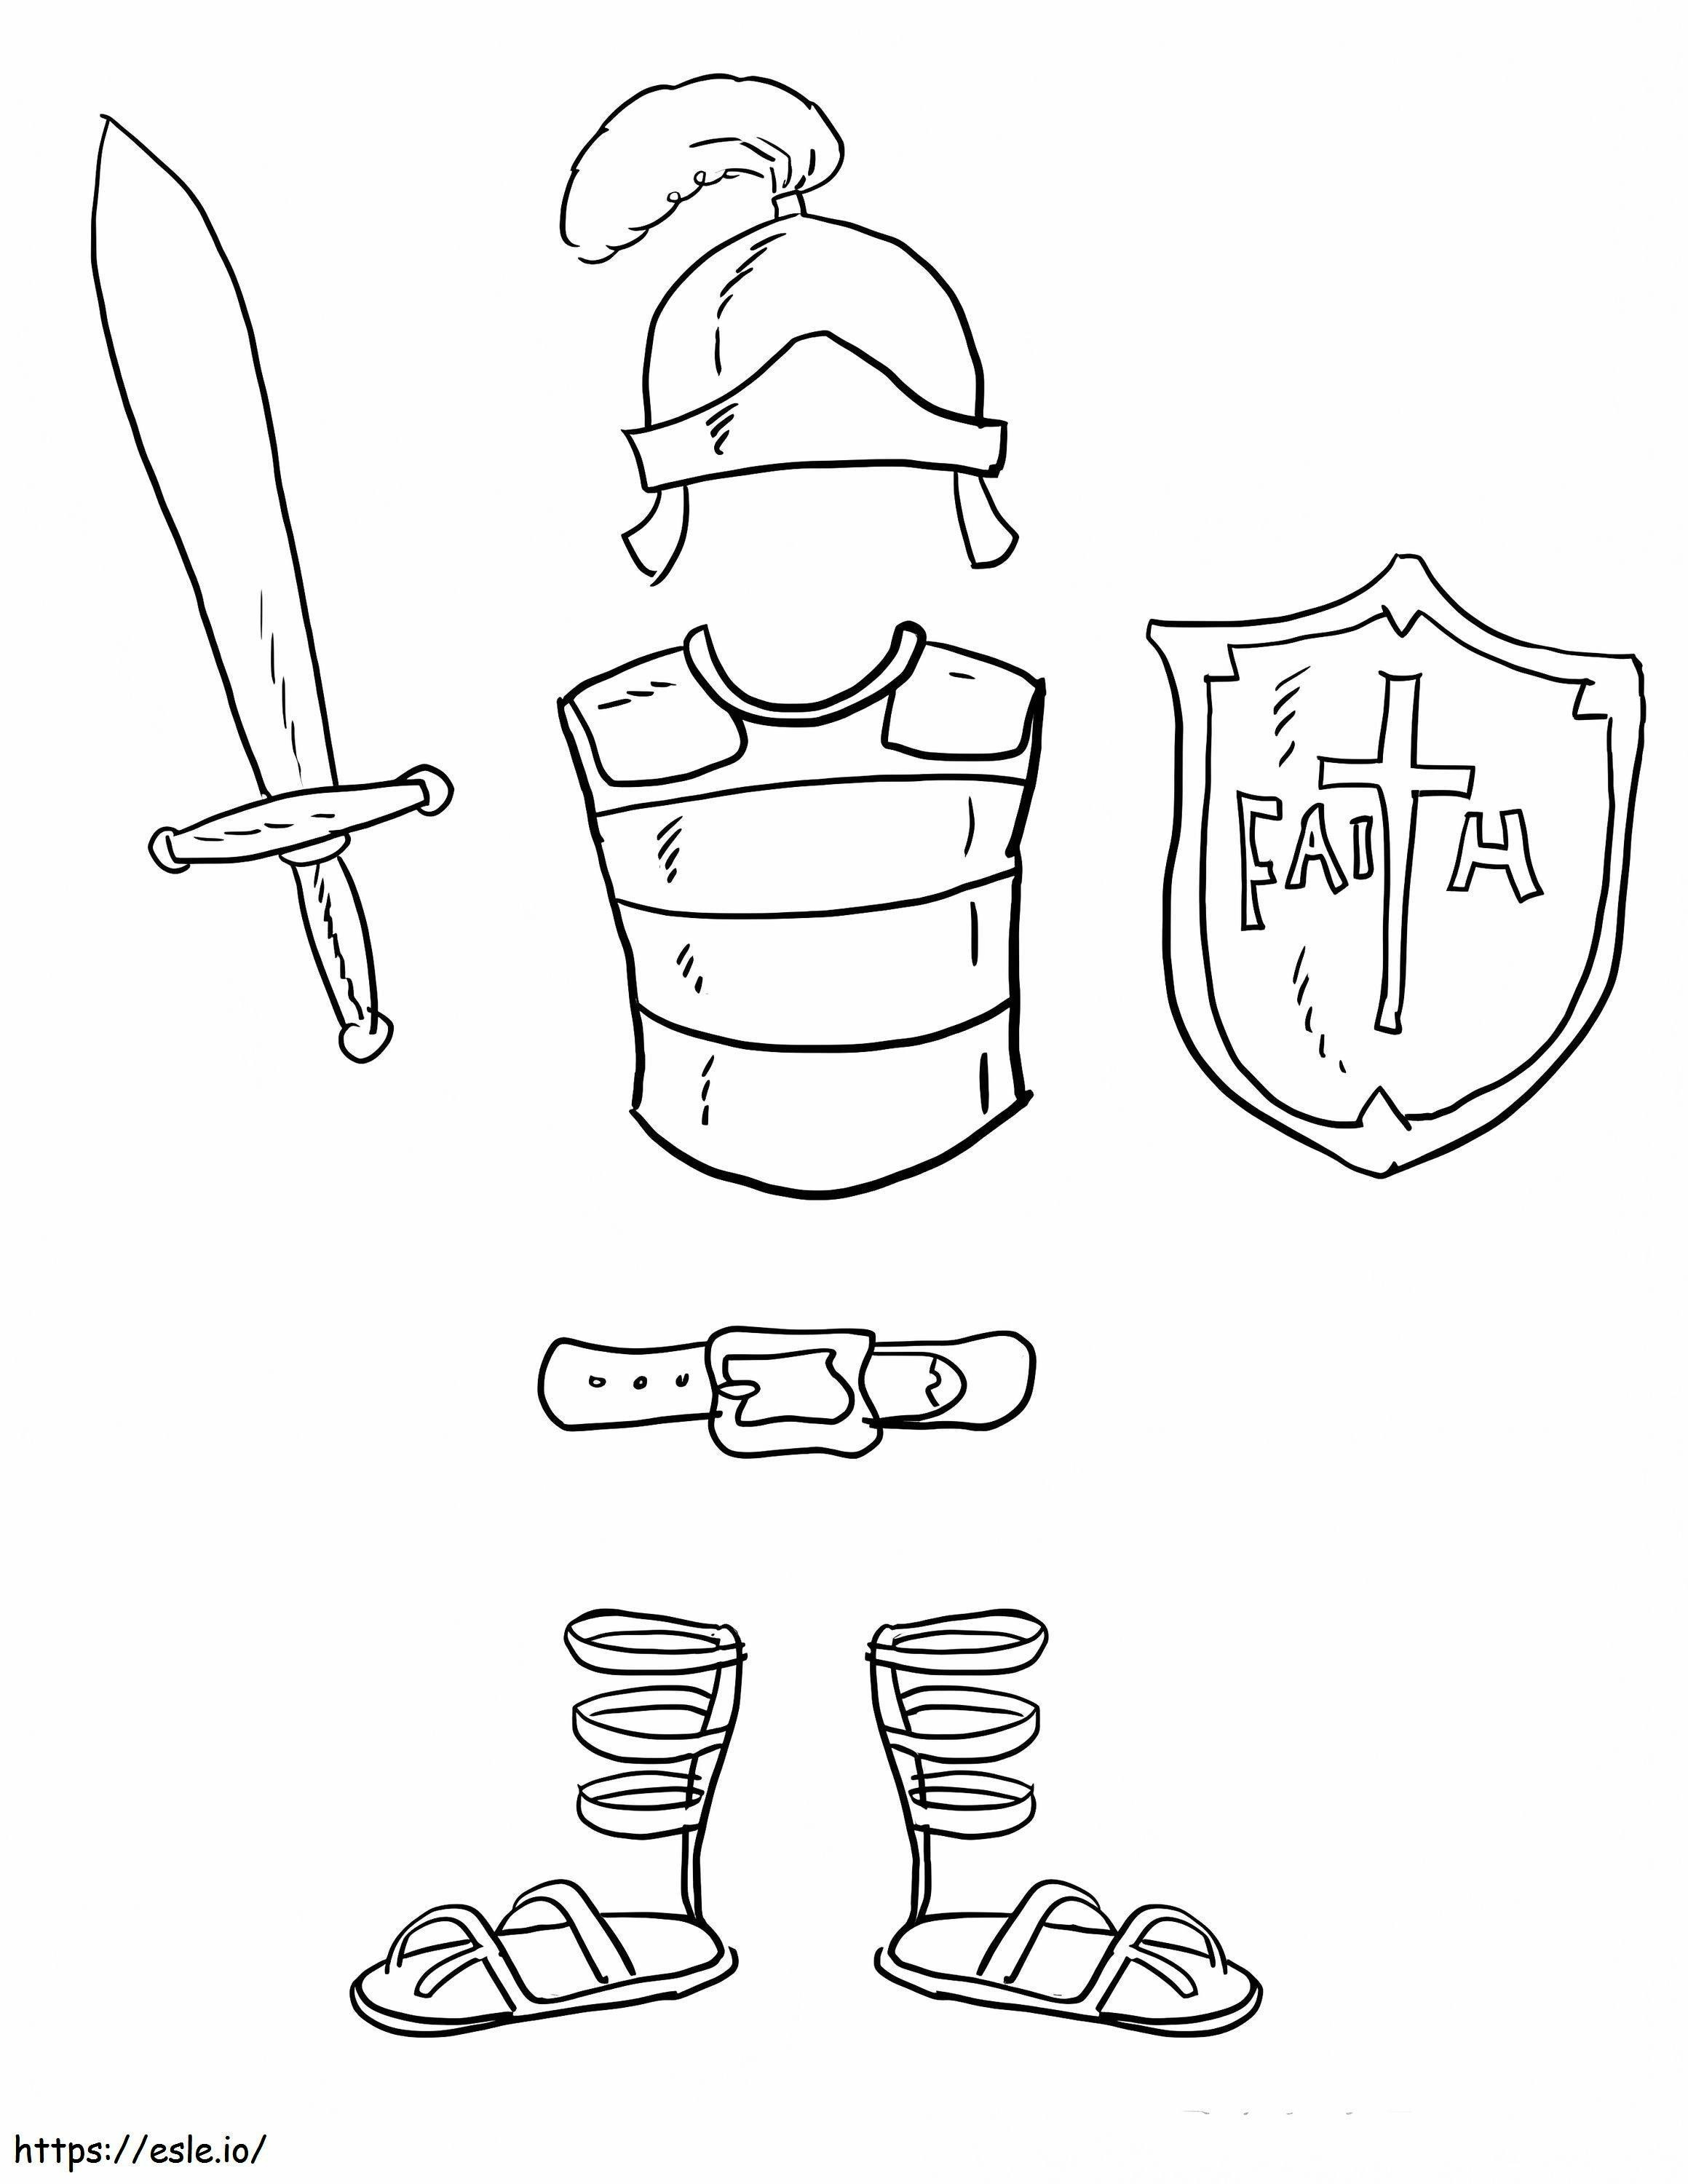 Armor Of God 4 coloring page